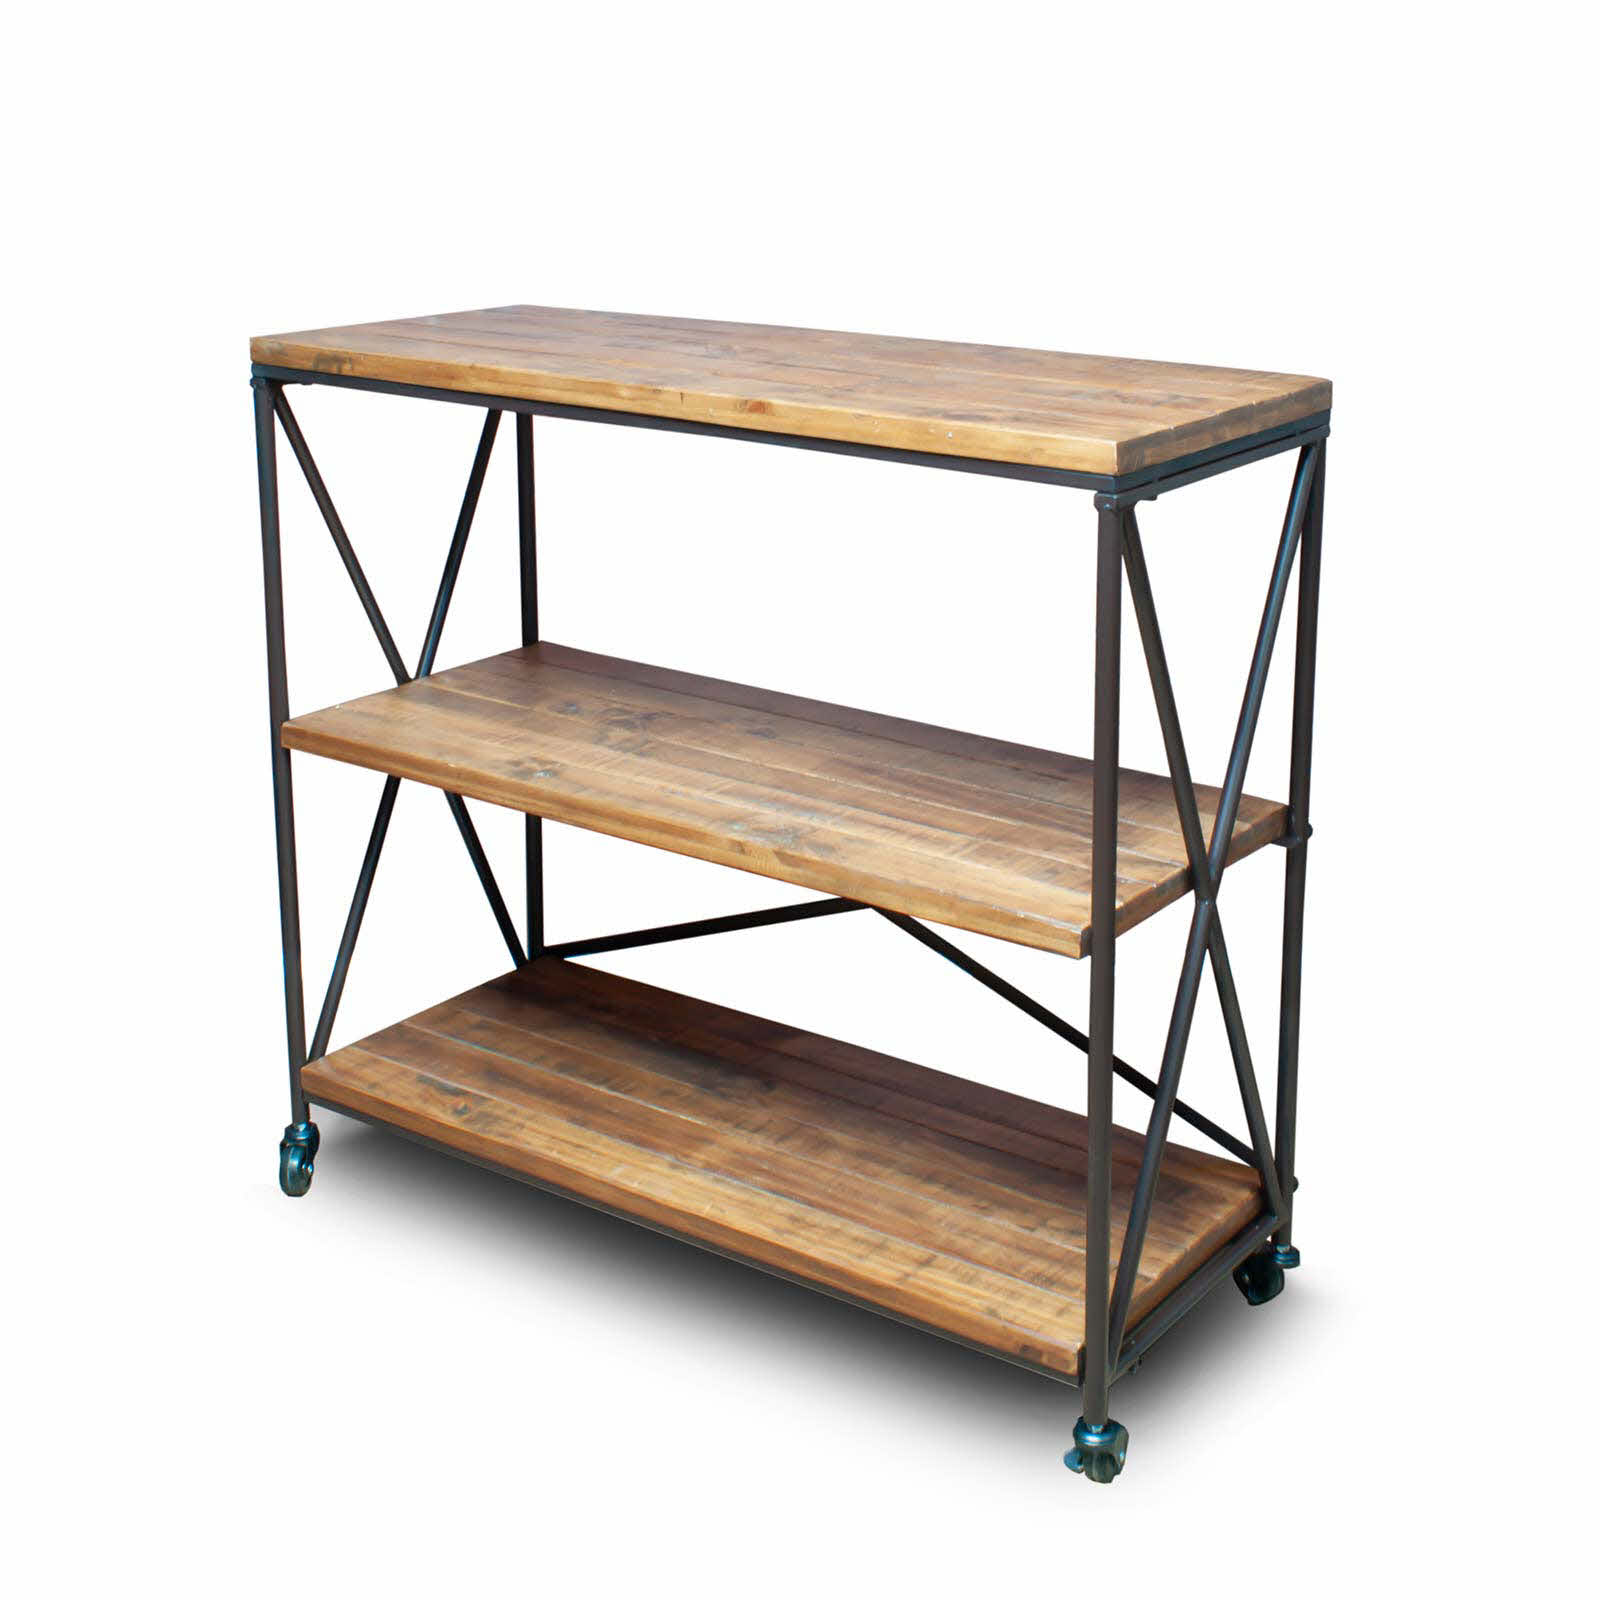 Table - Industrial Style 3 Shelf Home Retail Shelving Trolley Unit on Wheels (DI1)